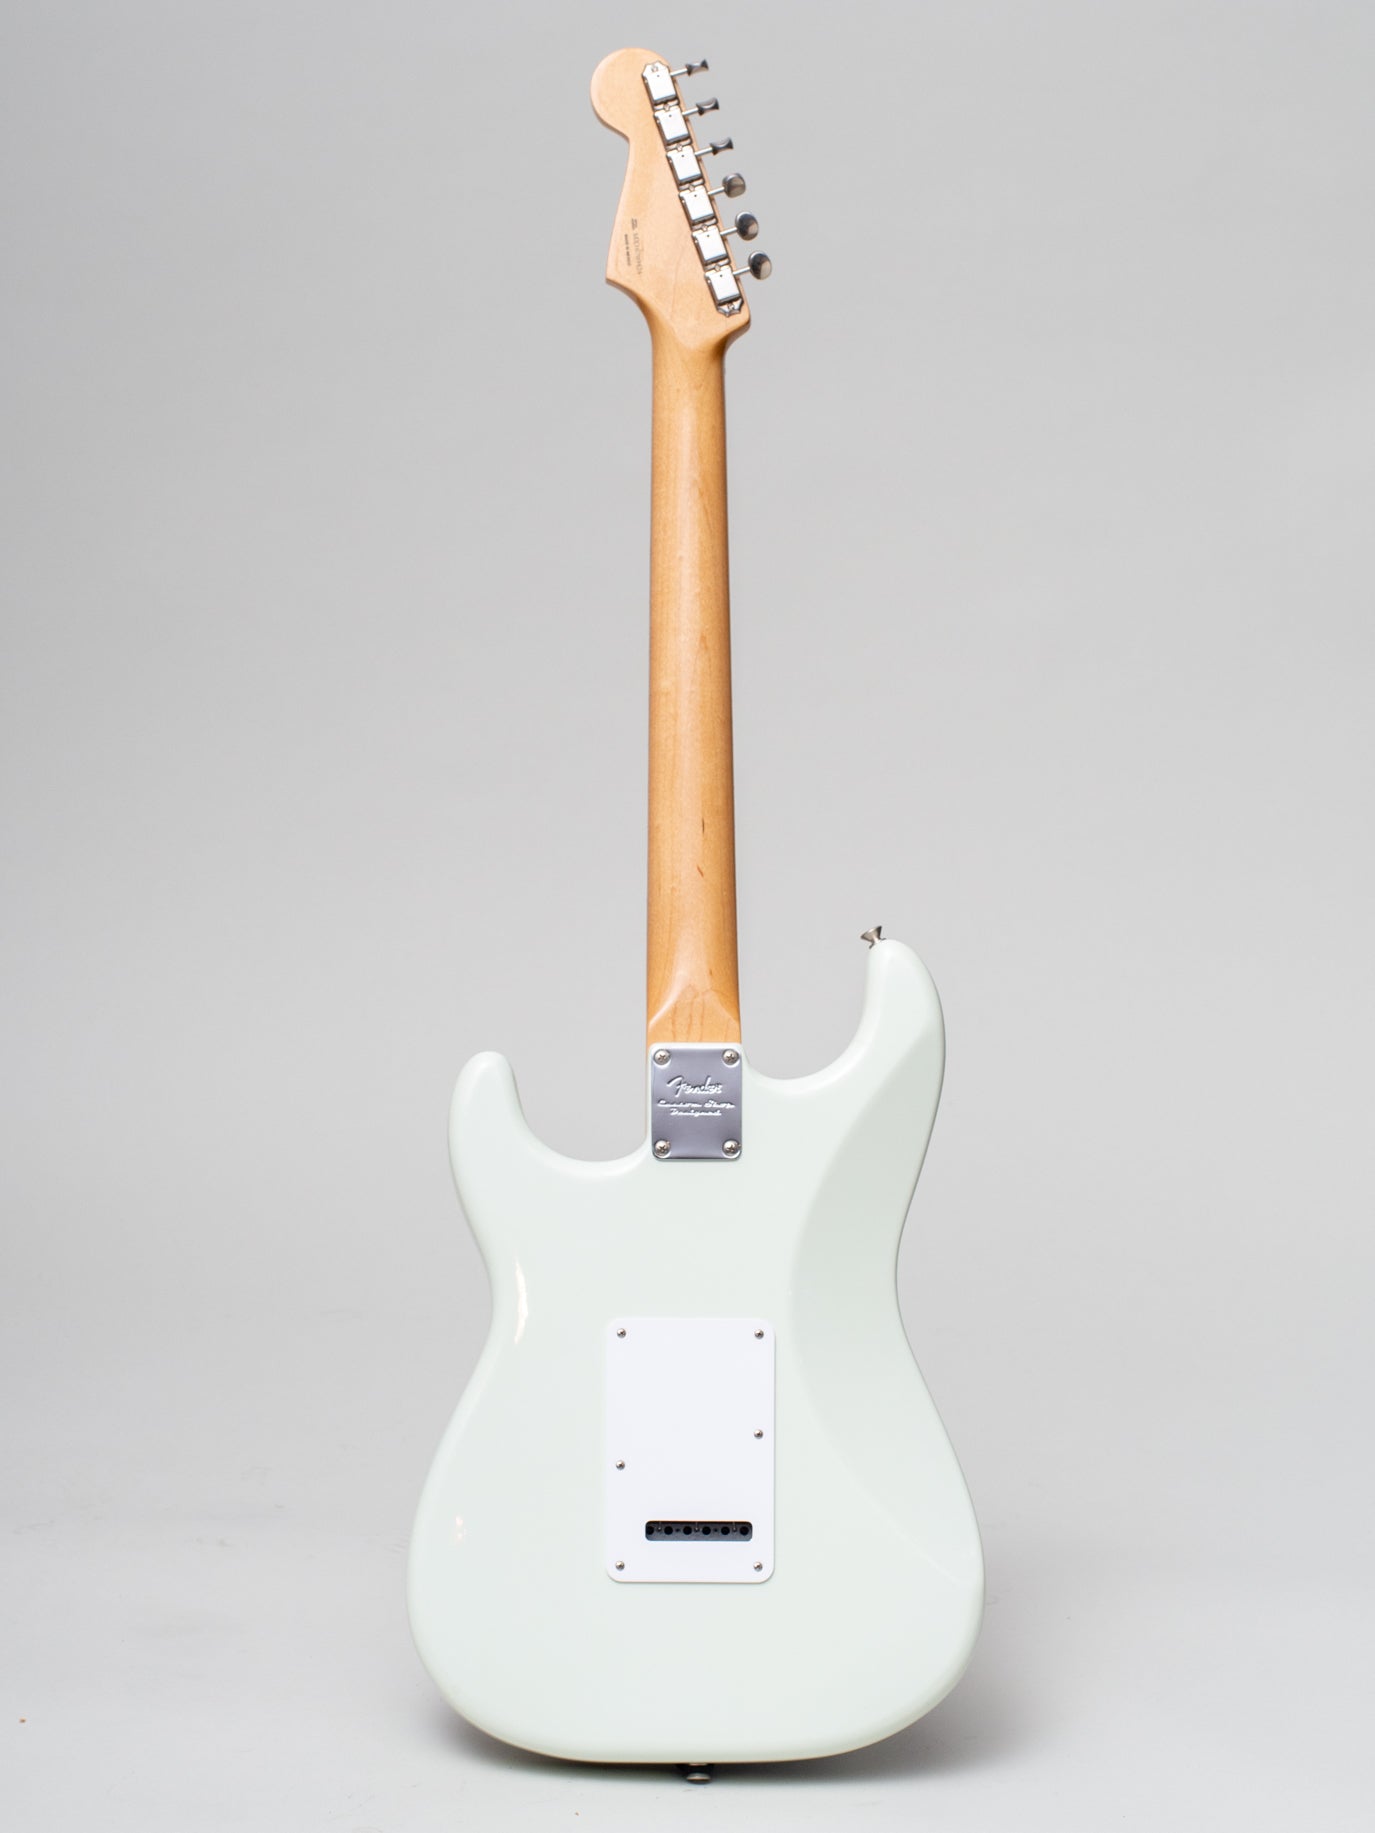 2016 Fender Classic Series 60s Stratocaster